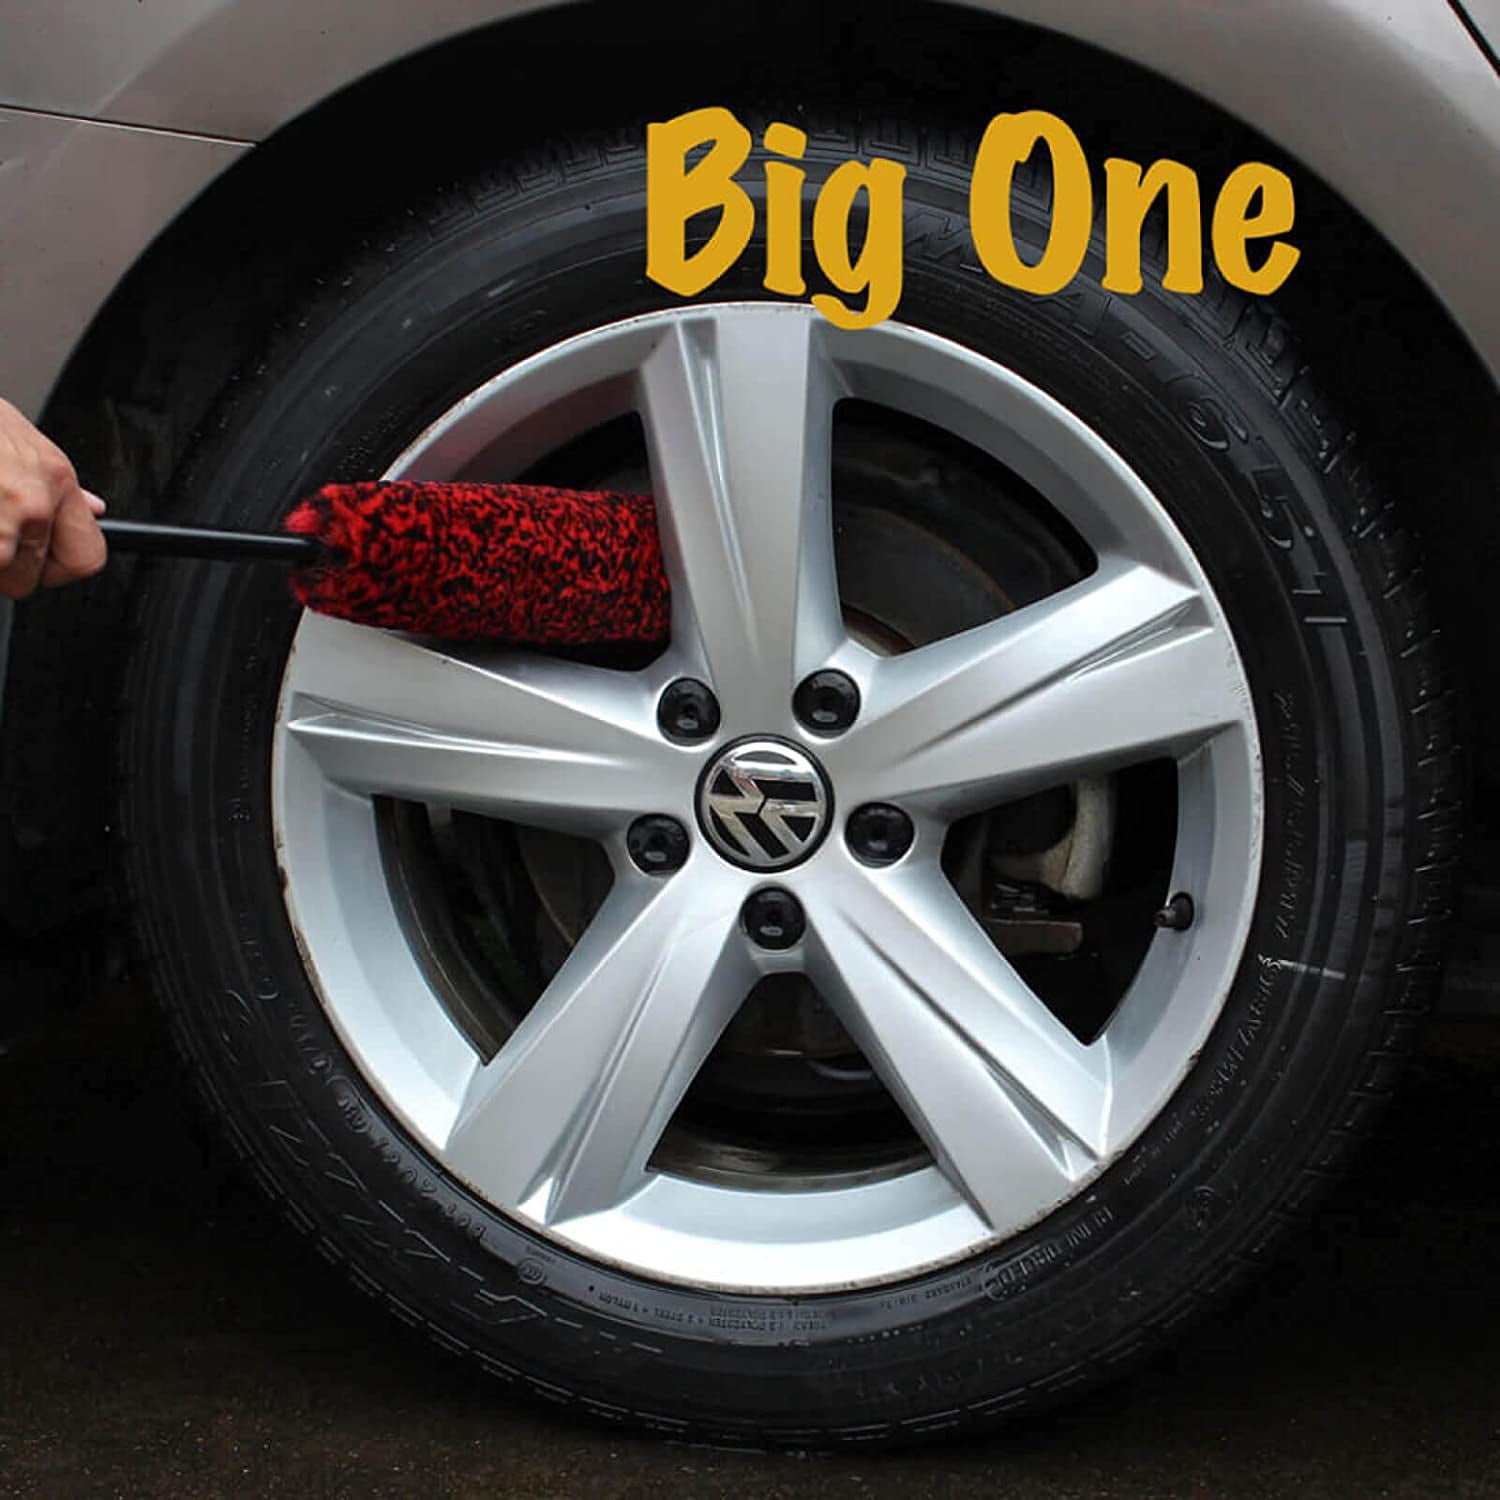 clean world industry Metal Free Wheel Cleaner Brush - Synthetic Wool Car Cleaning  Brush Highly Absorbent Tire Brush Dense Rim Brush for Wheels, Fend